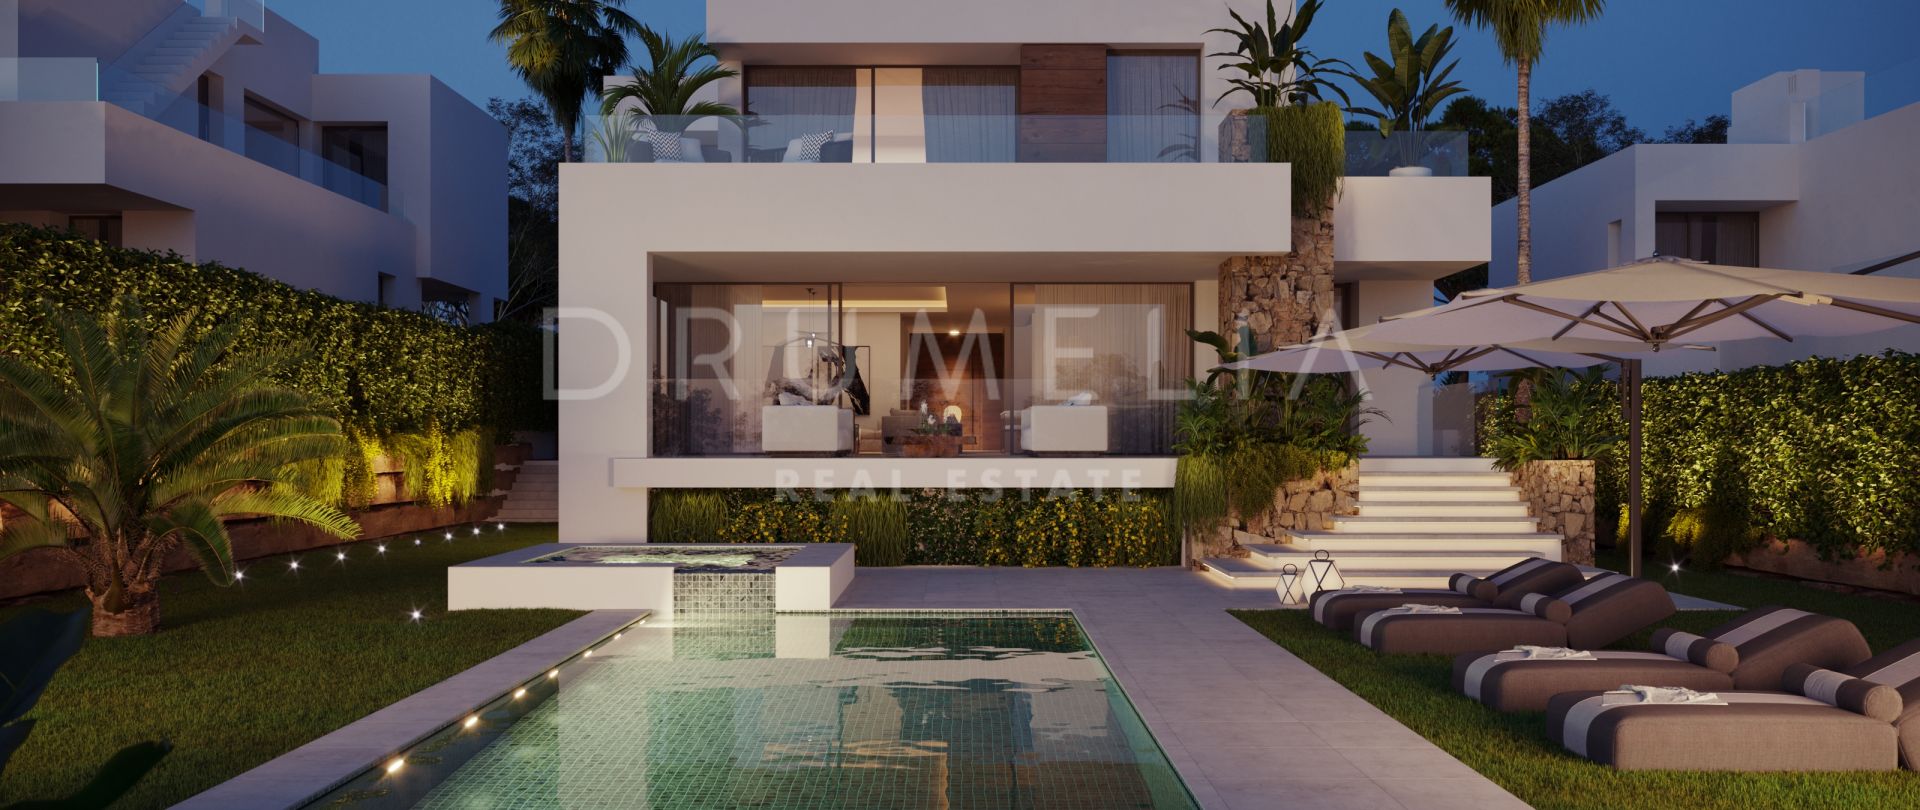 Golden 7 - Luxury Modern House in Chic New Development, Marbella's Golden Mile (Project)